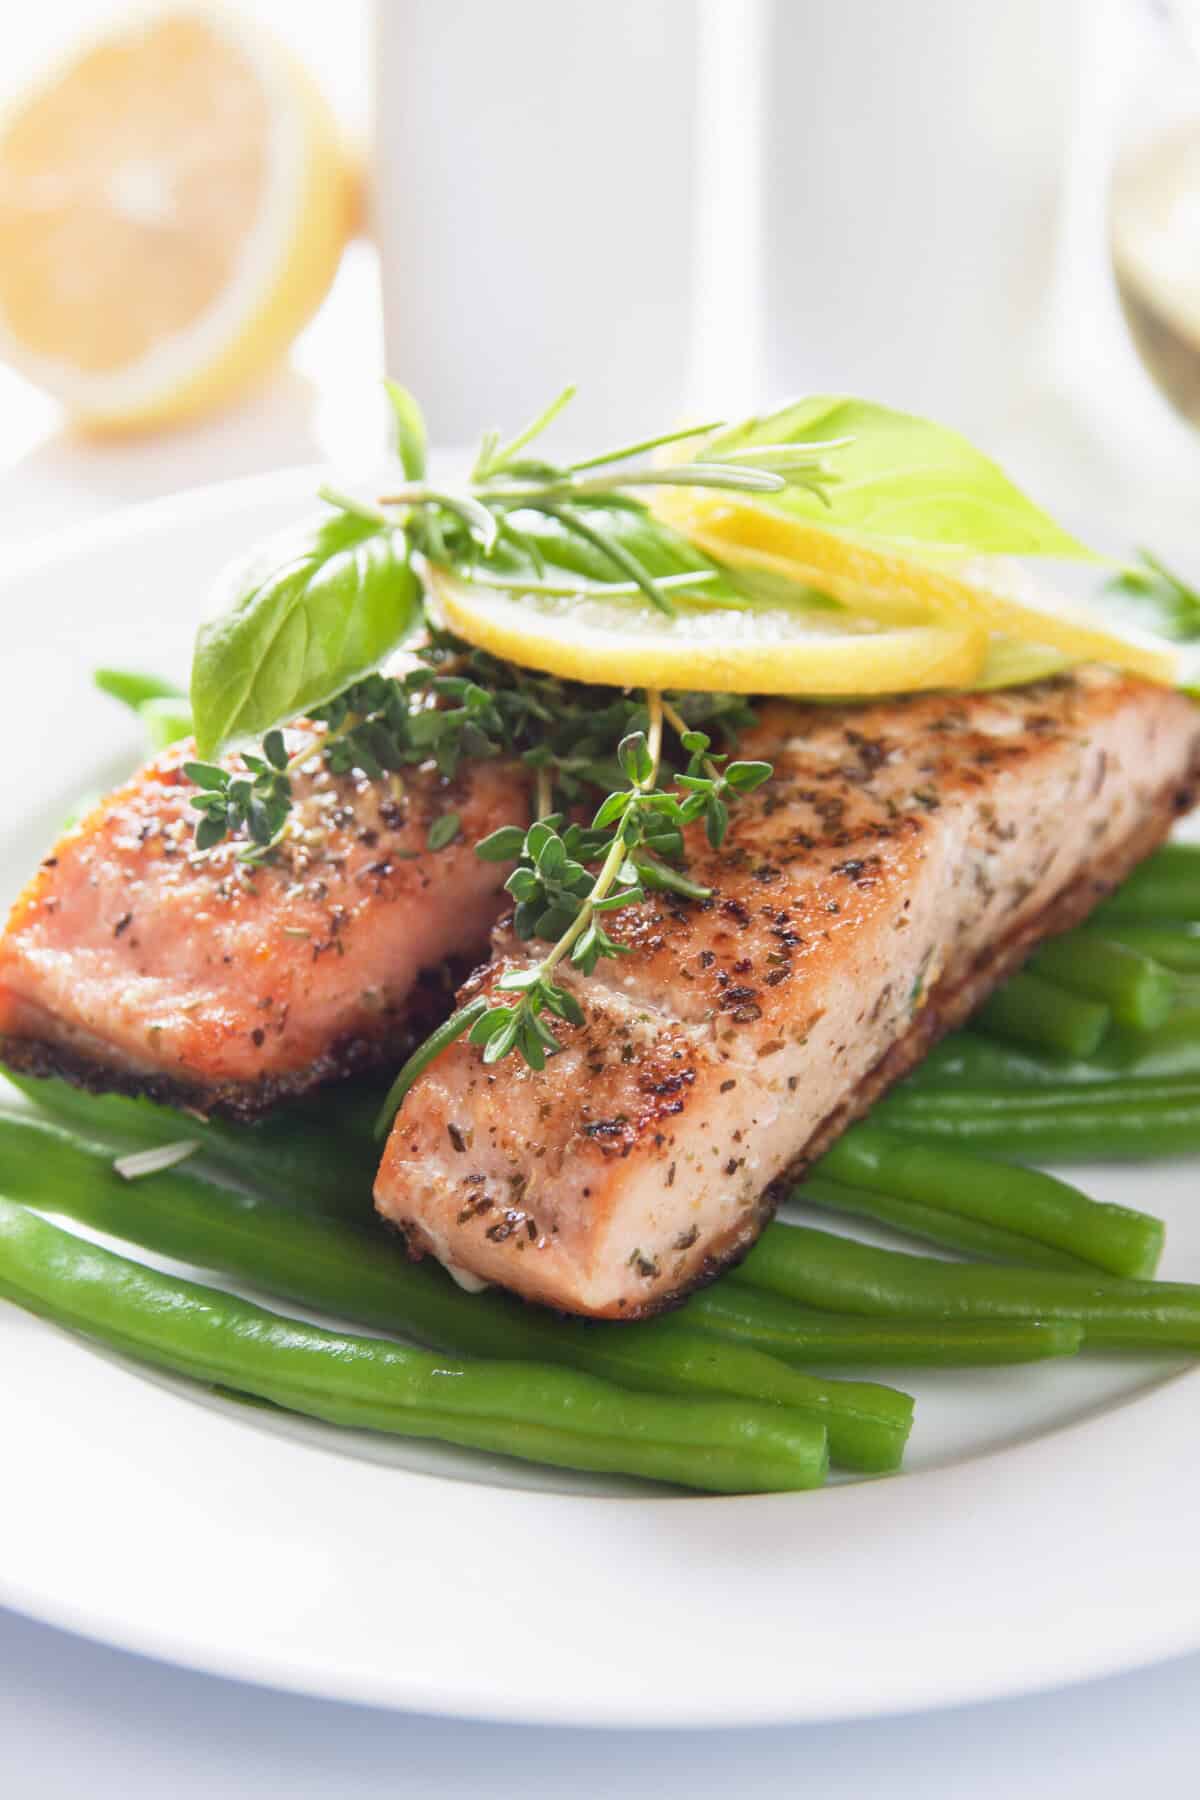 Two pieces of grilled salmon, sitting on a bed of blanched green beans served on a white round plate.